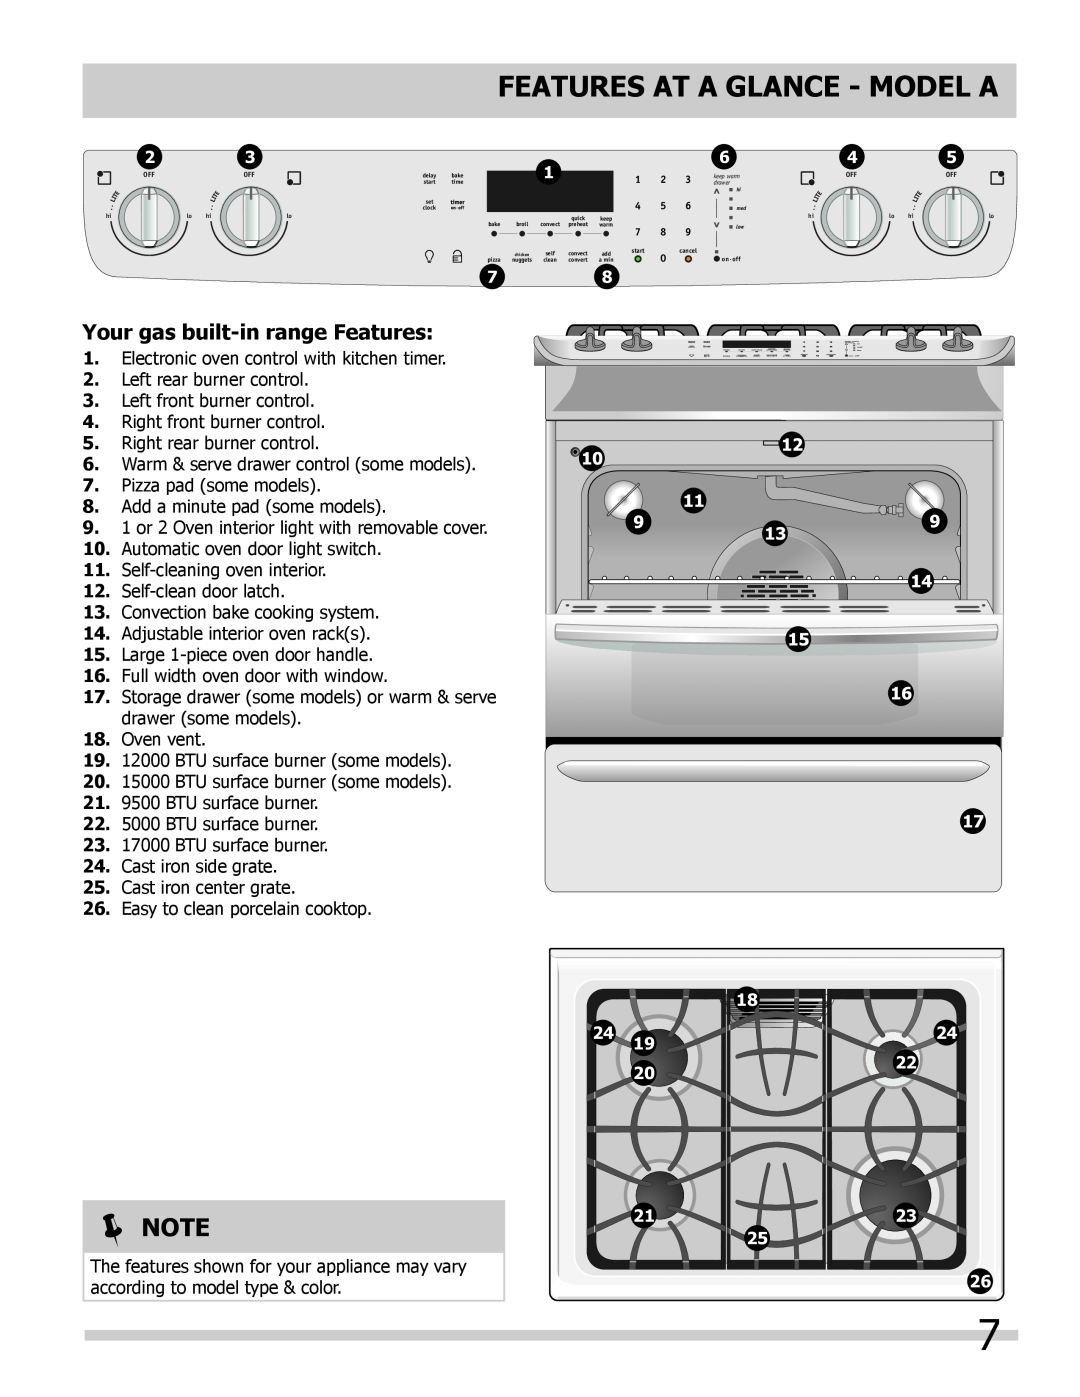 Frigidaire FPGS3085KF, FGGS3065KF, FGGS3065KW Features At A Glance - Model A, Your gas built-inrange Features, Note, 2022 